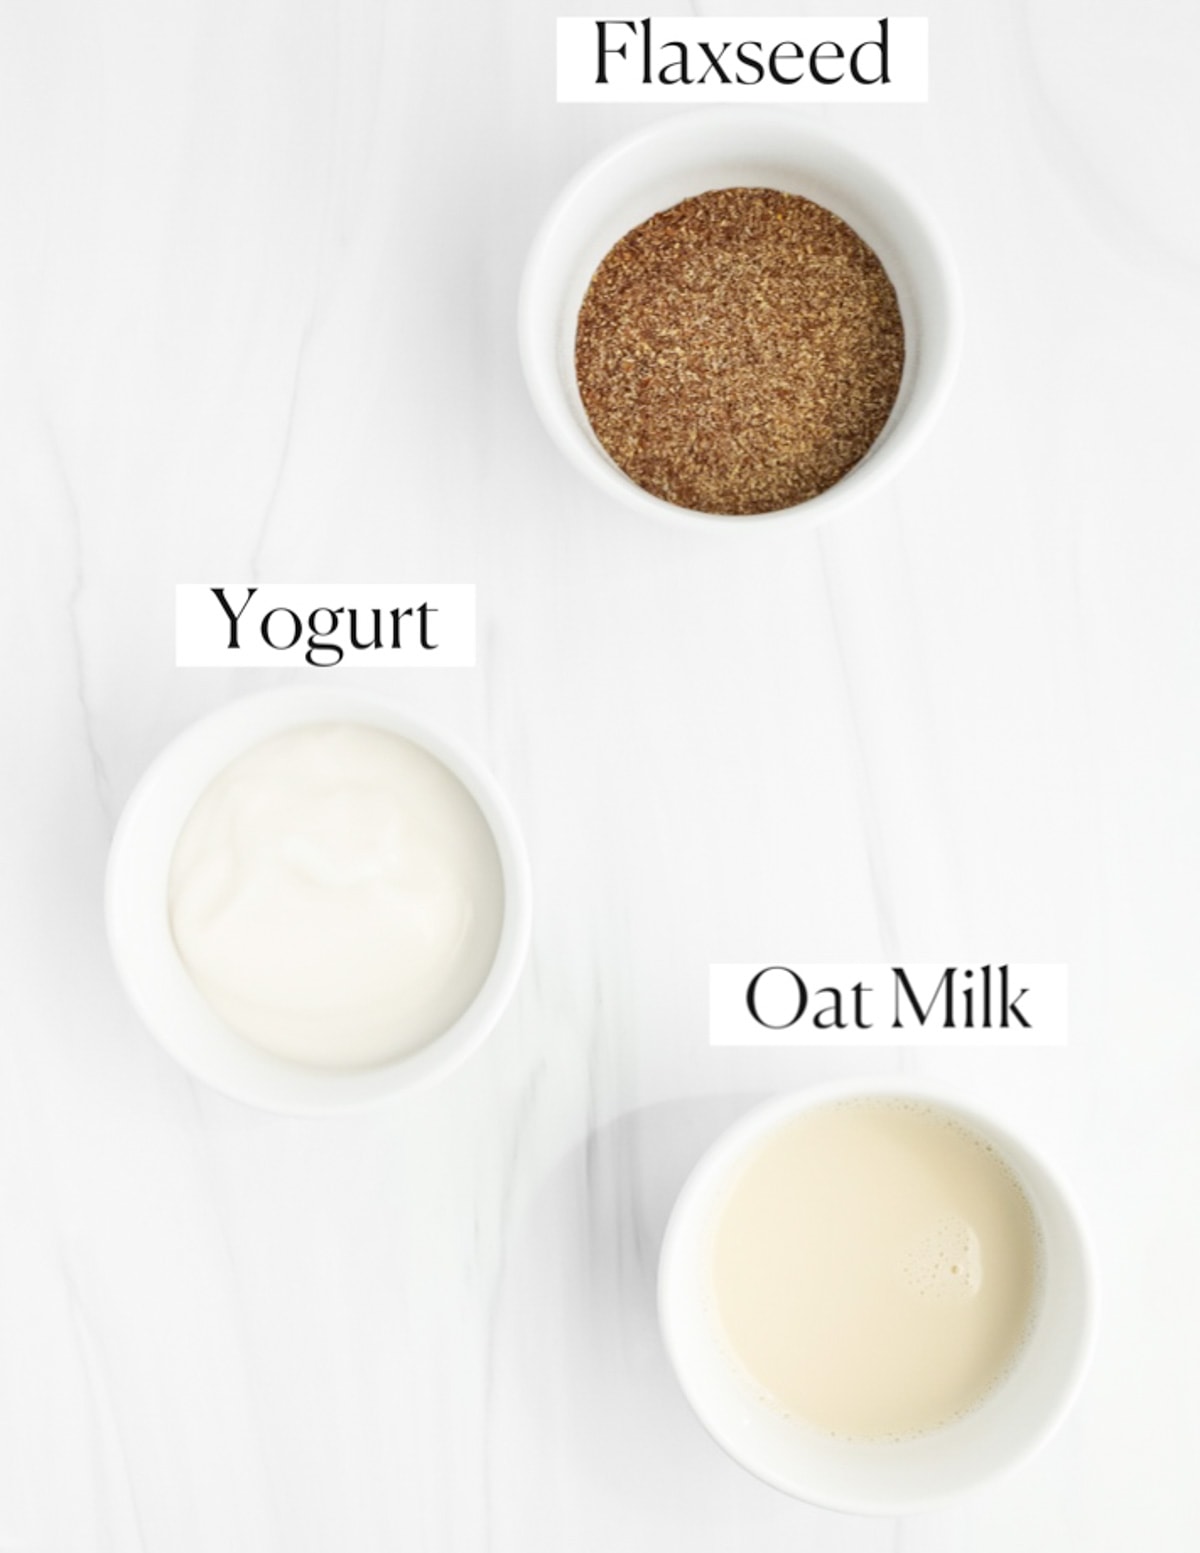 Three bowls filled with labeled ingredients including: flaxseed, yogurt, and oat milk.